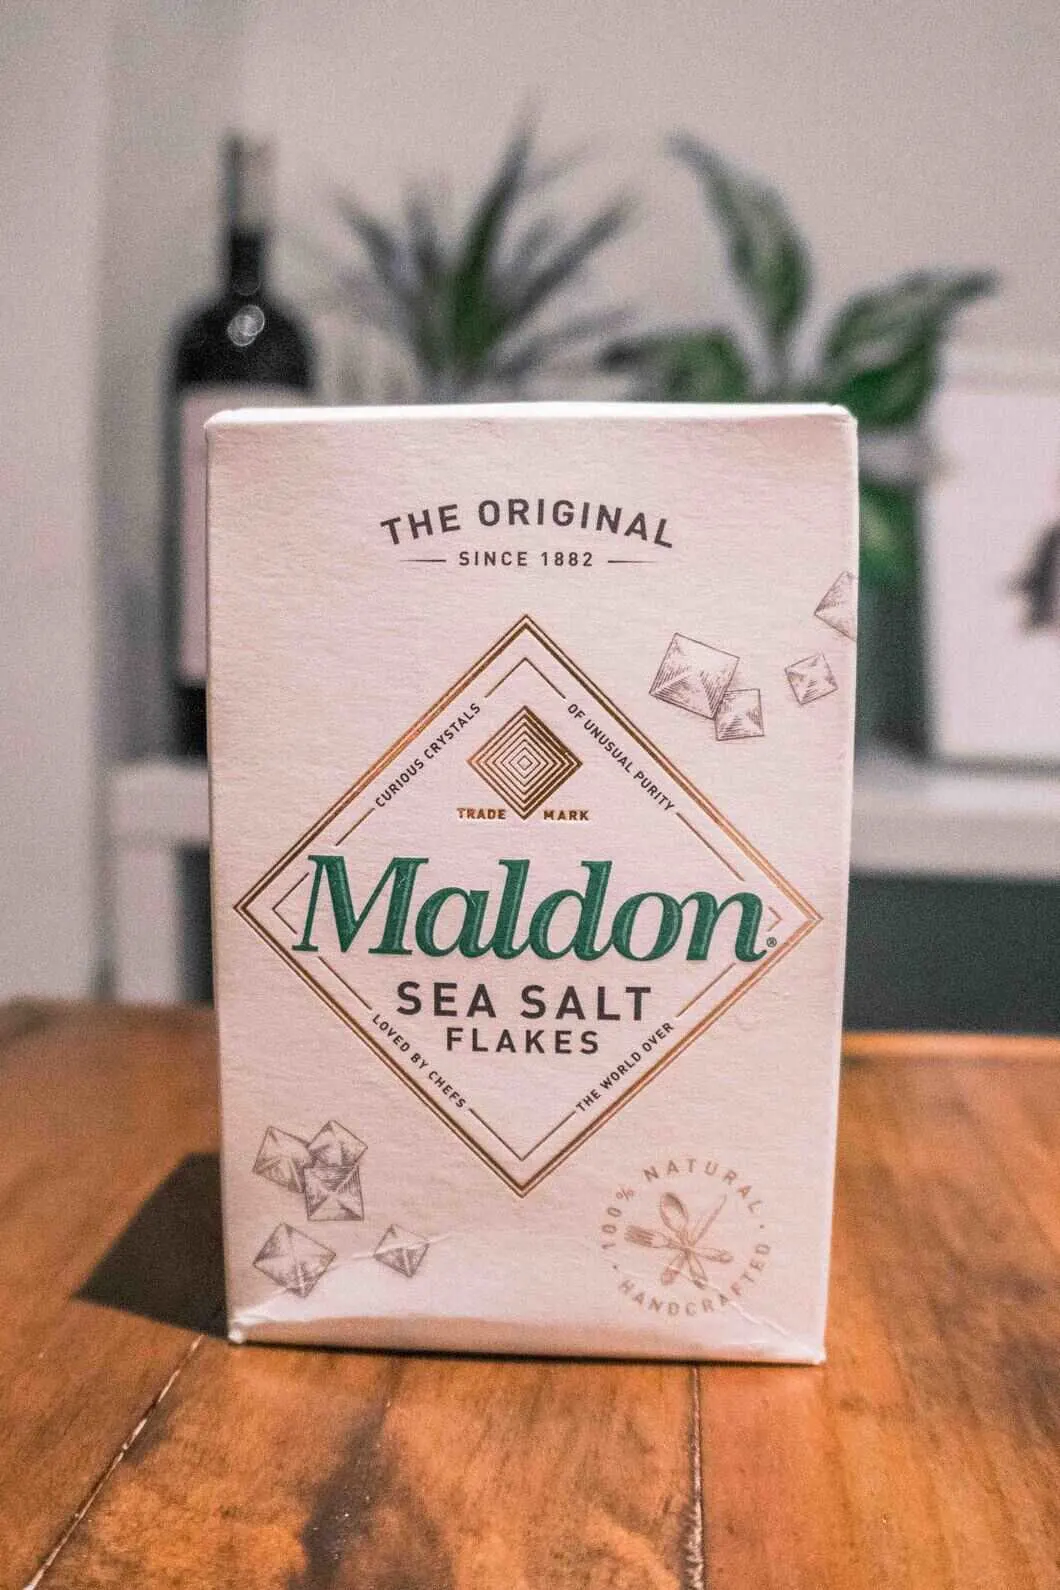  Maldon Sea Salt can easily be picked up from one of the supermarkets in the UK making it an easy gift to take home. 